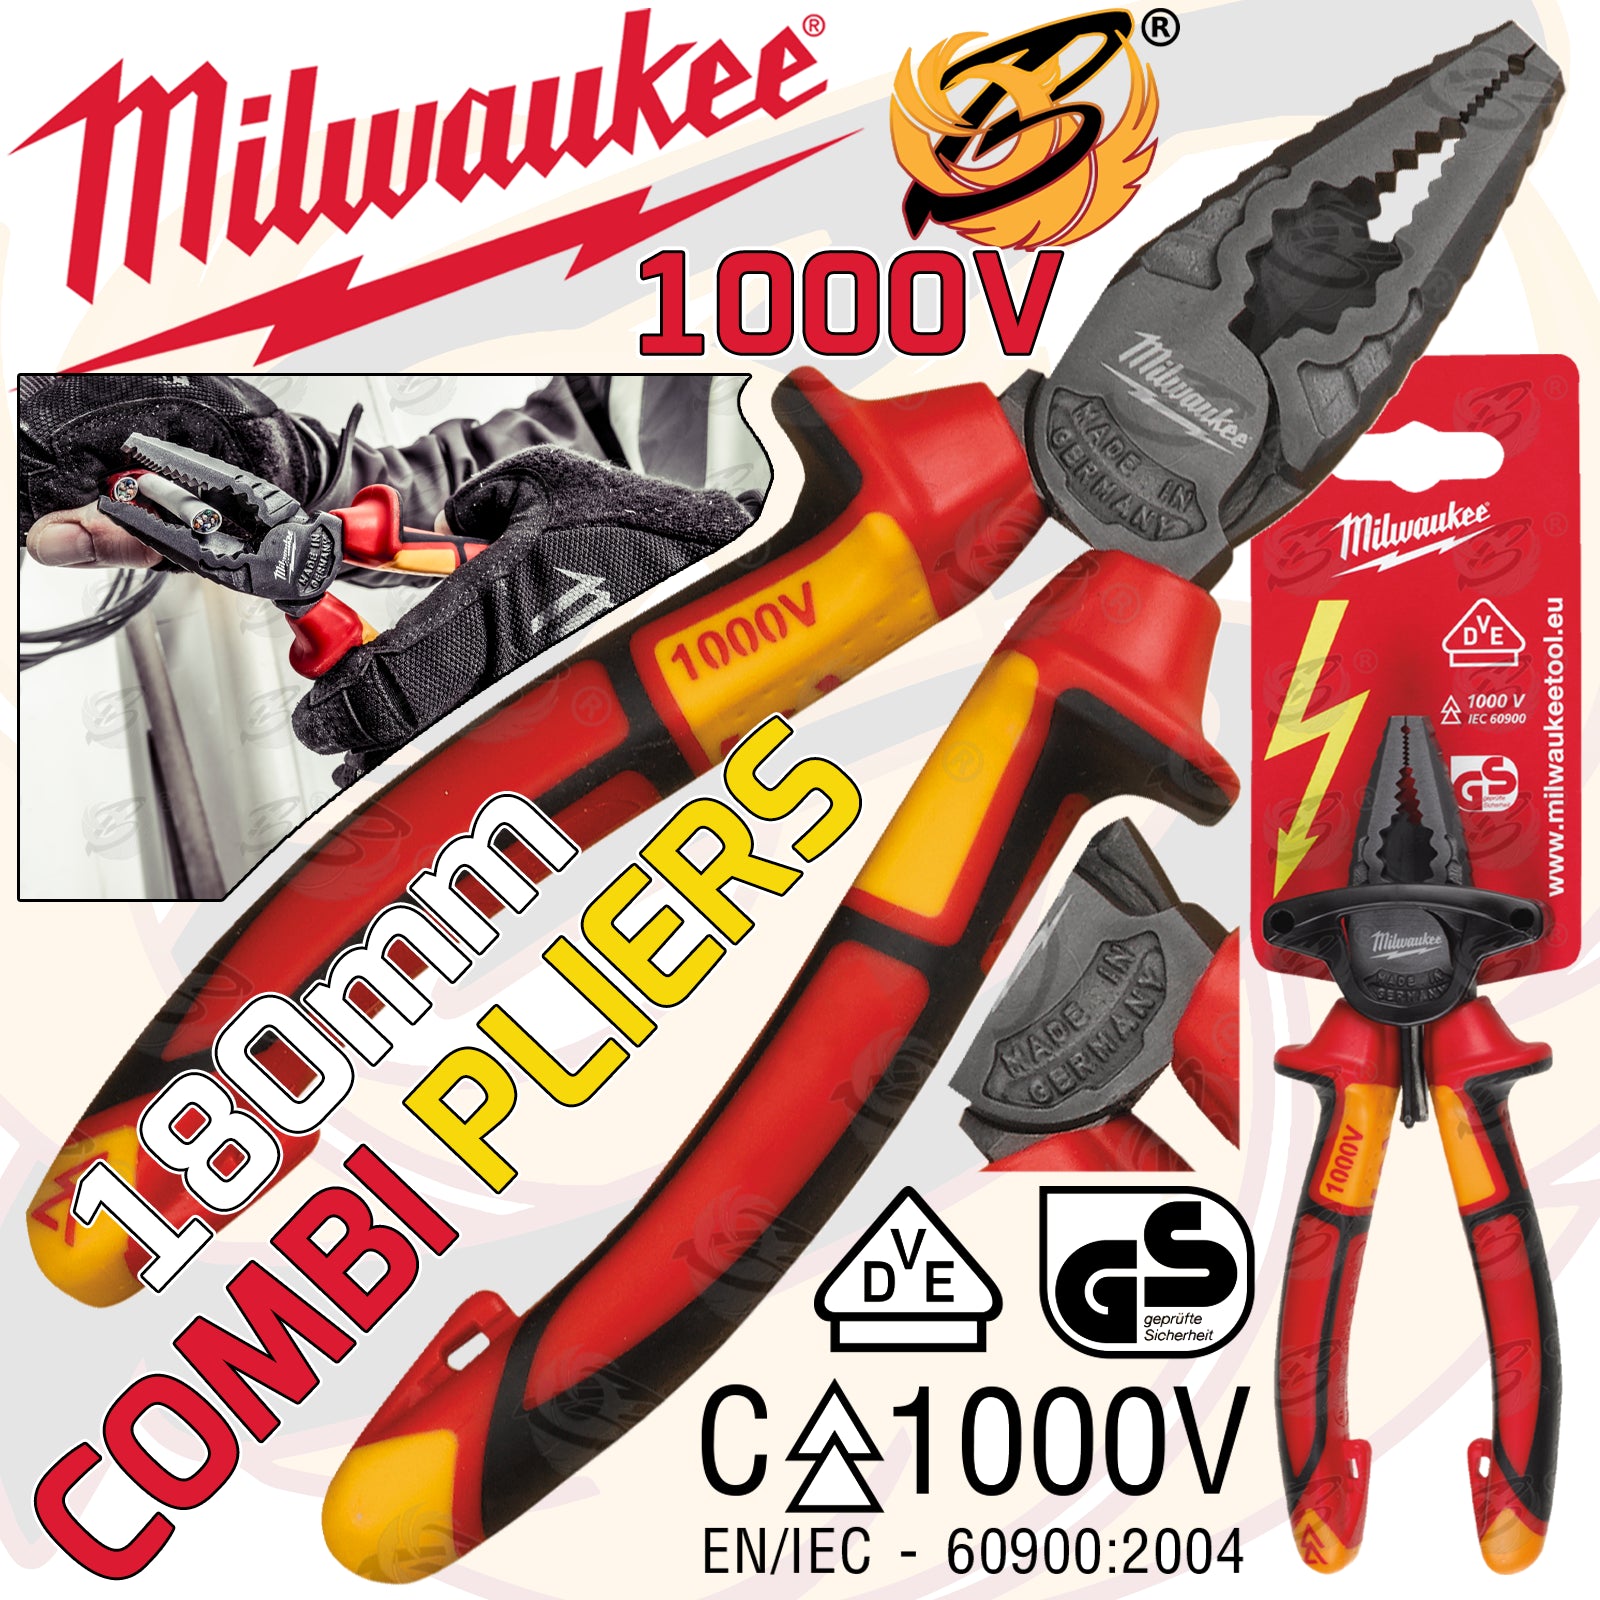 MILWAUKEE 1000V VDE COMBINATION PLIERS 180MM